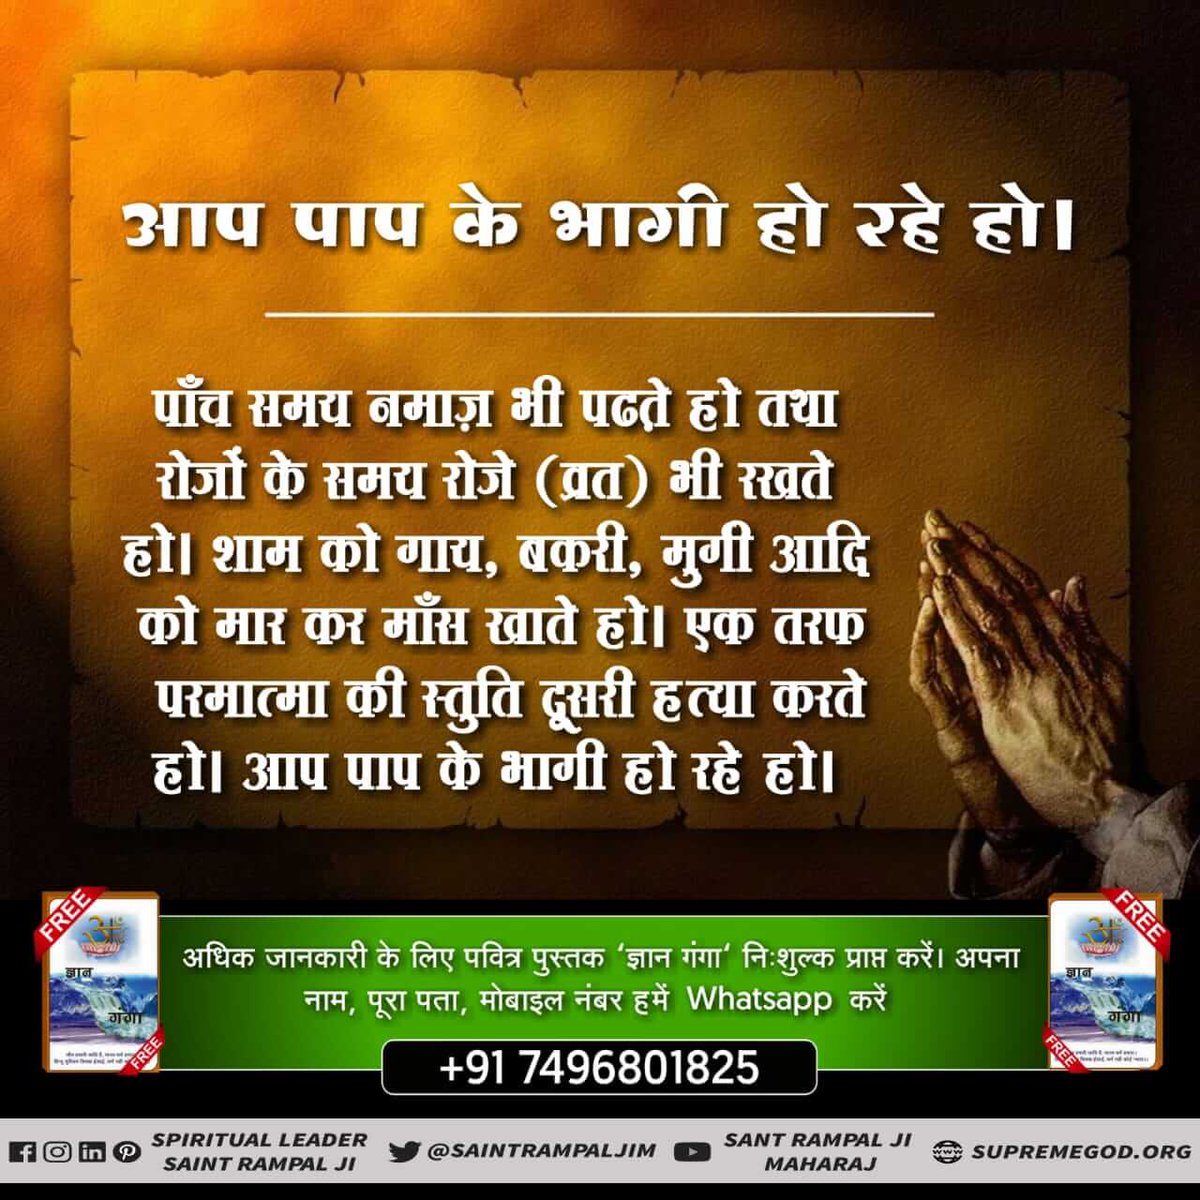 #रहम_करो_मूक_जीवों_पर The Holy Scriptures are the constitution of God Kabir. We can extract the orders of the Supreme God from it. And in these Holy Scriptures God has never told us to eat meat. Sant RampalJi YouTube Channel